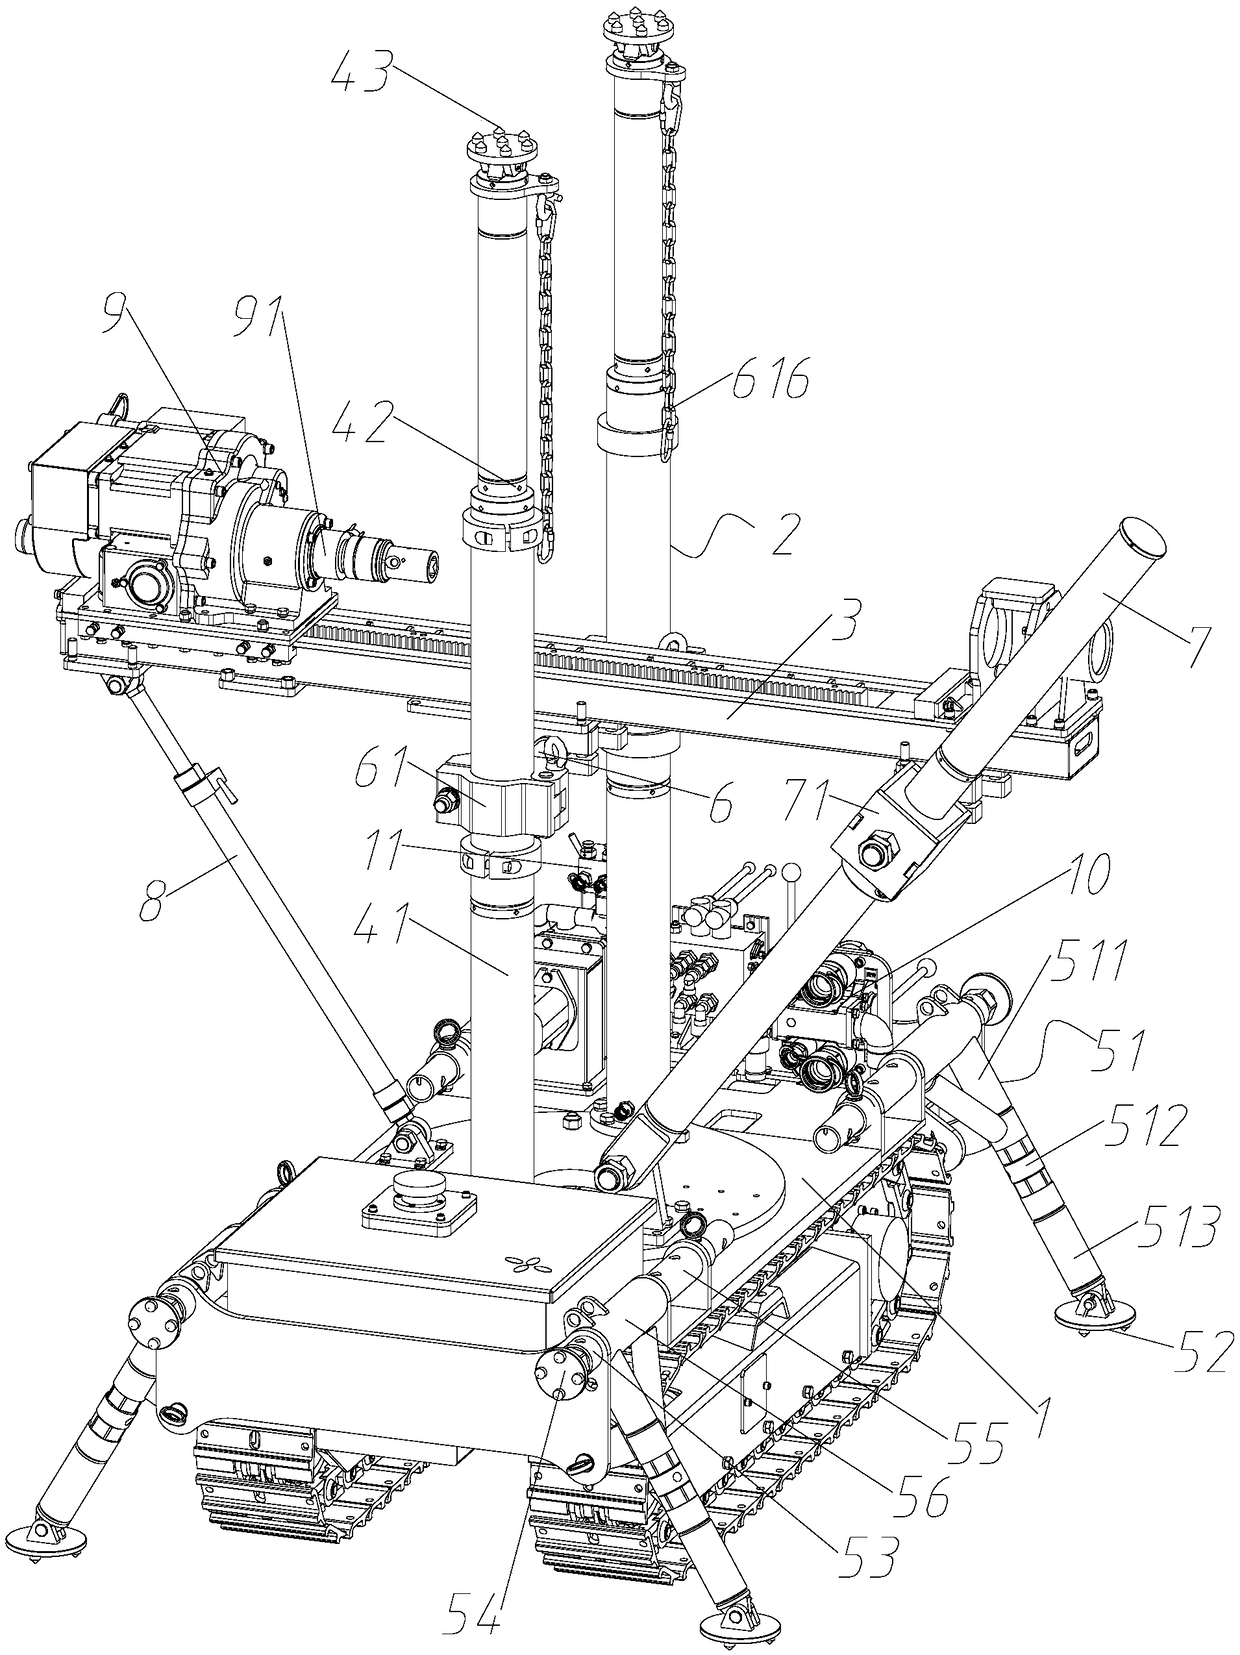 Self-propelled double-column drill carriage